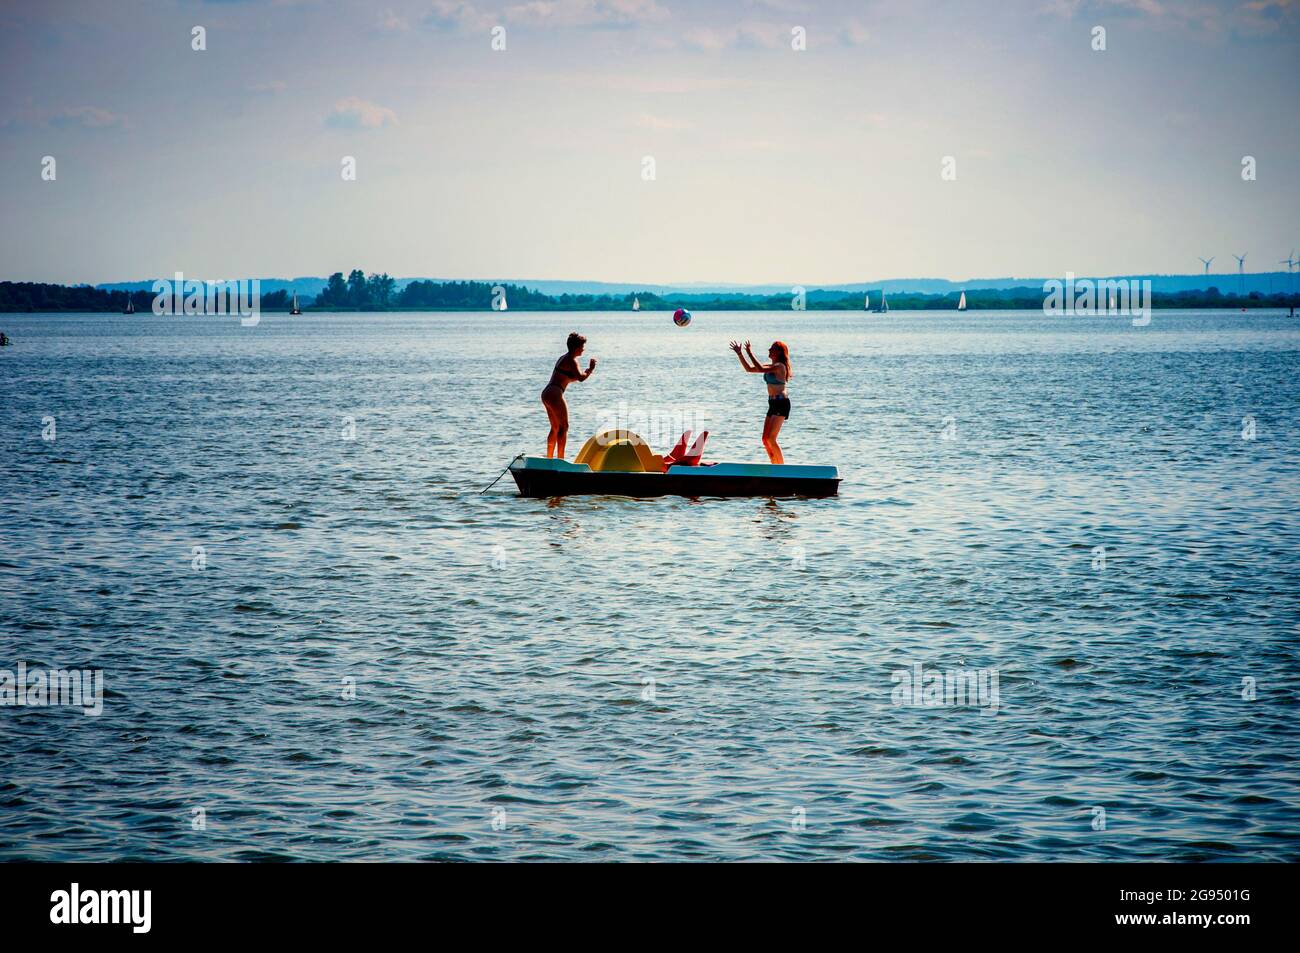 BOHMTE, GERMANY. JUNE 27, 2021 Dammer Natural Park. Lake view, womans playing valleyball. Stock Photo